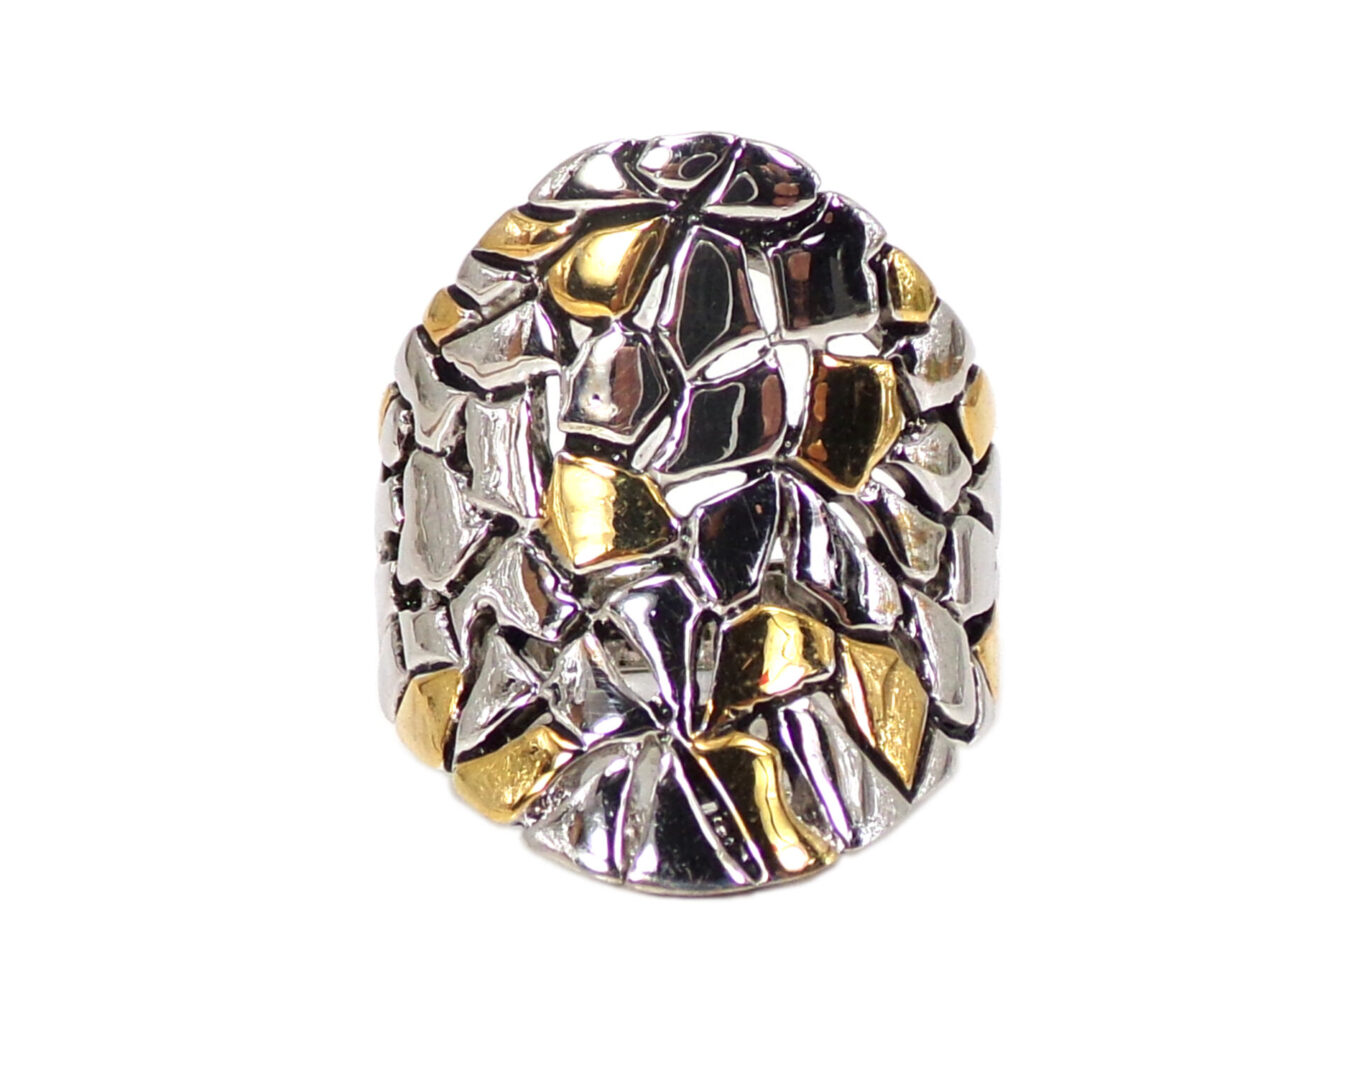 SILVER AND GOLD RING - Calisa Designs